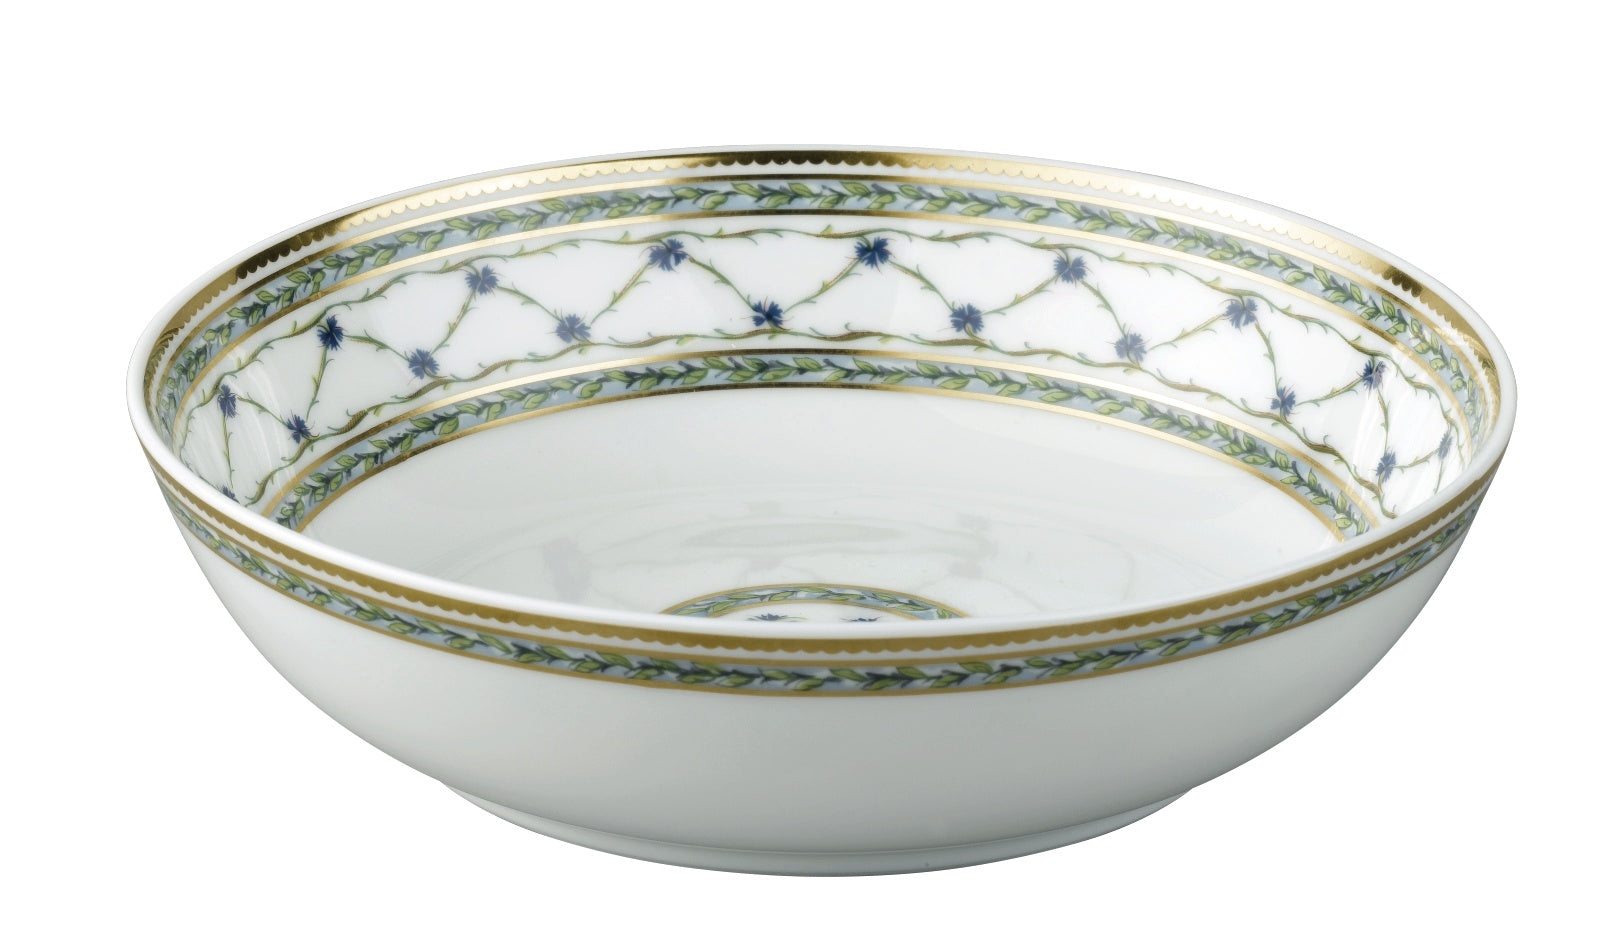 Allee Royale - Breakfast Bowl Coupe 6.7 in 11.8 oz